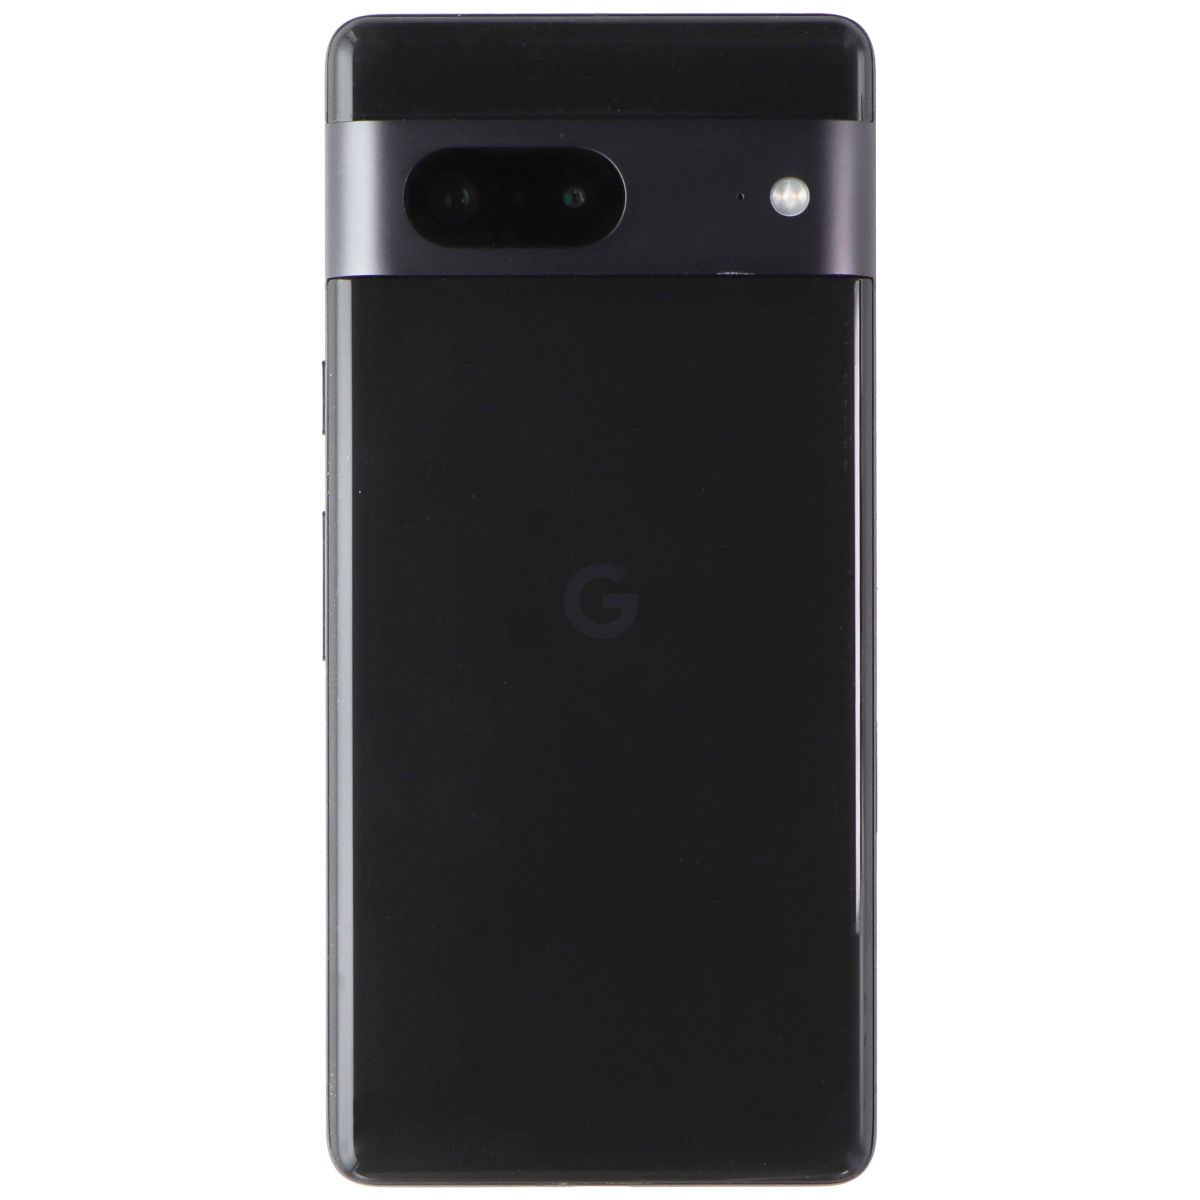 Google Pixel 7 (6.3-inch) Smartphone (GVU6C) Verizon Only - 128GB / Obsidian Cell Phones & Smartphones Google    - Simple Cell Bulk Wholesale Pricing - USA Seller